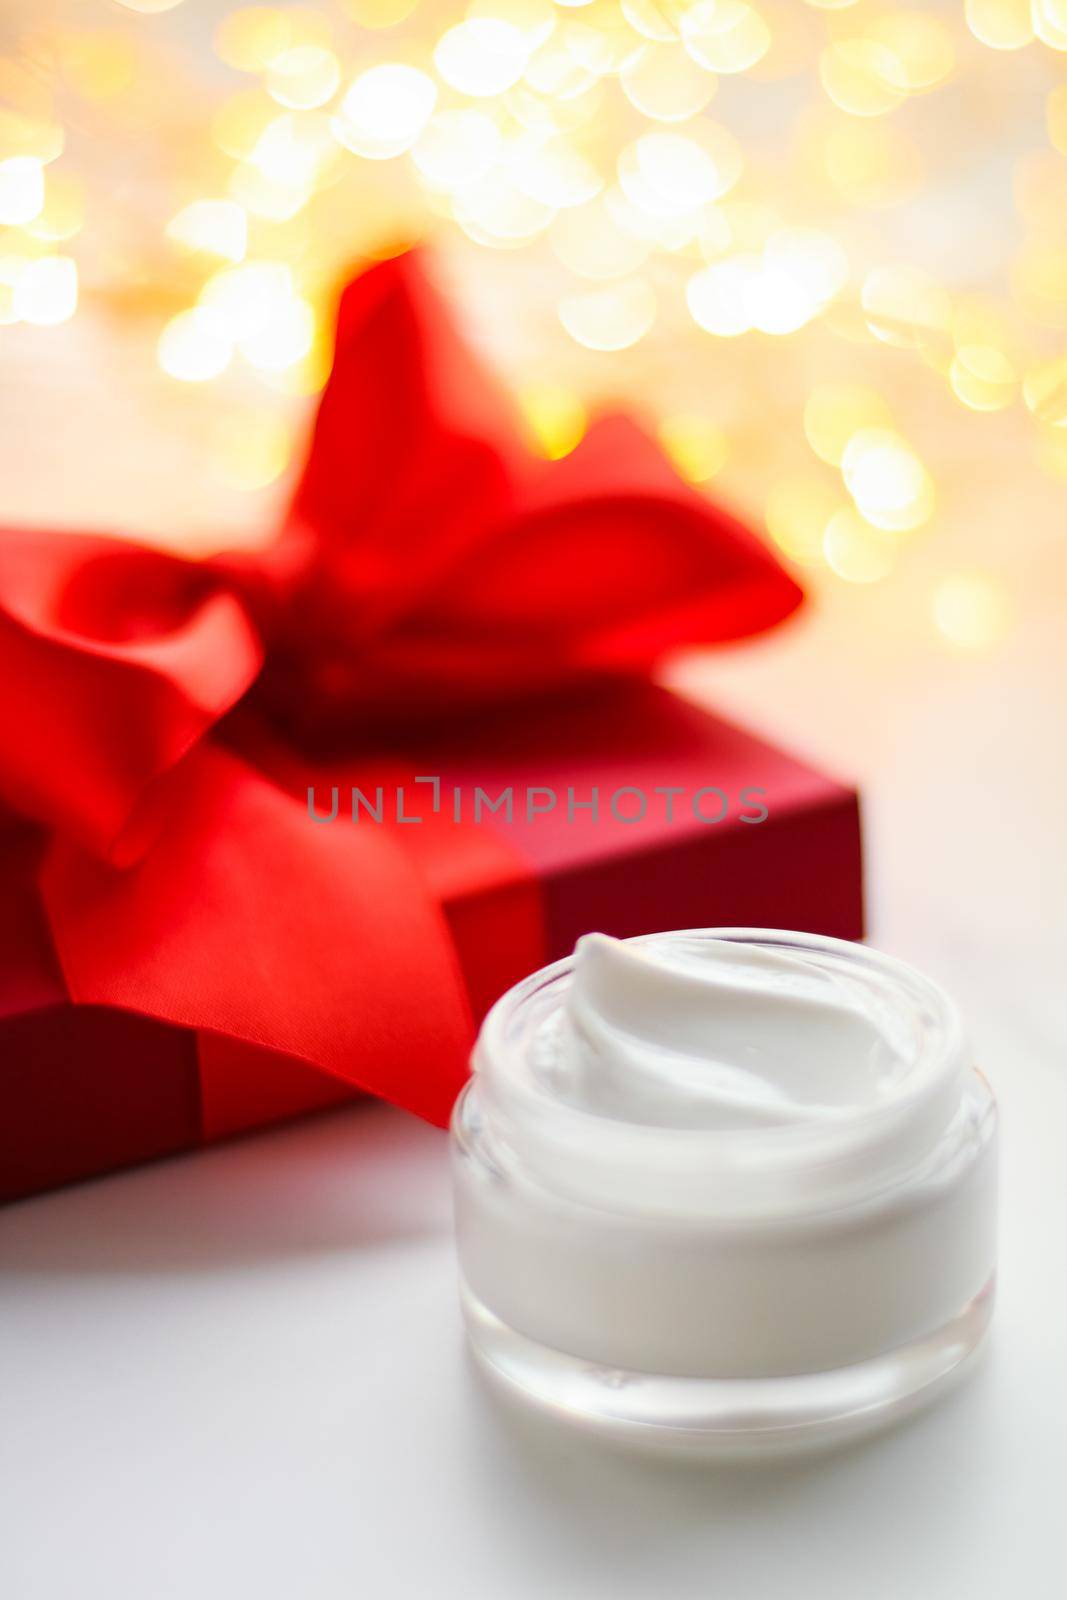 Beauty, cosmetics and skincare concept - Luxury face cream as a holiday gift